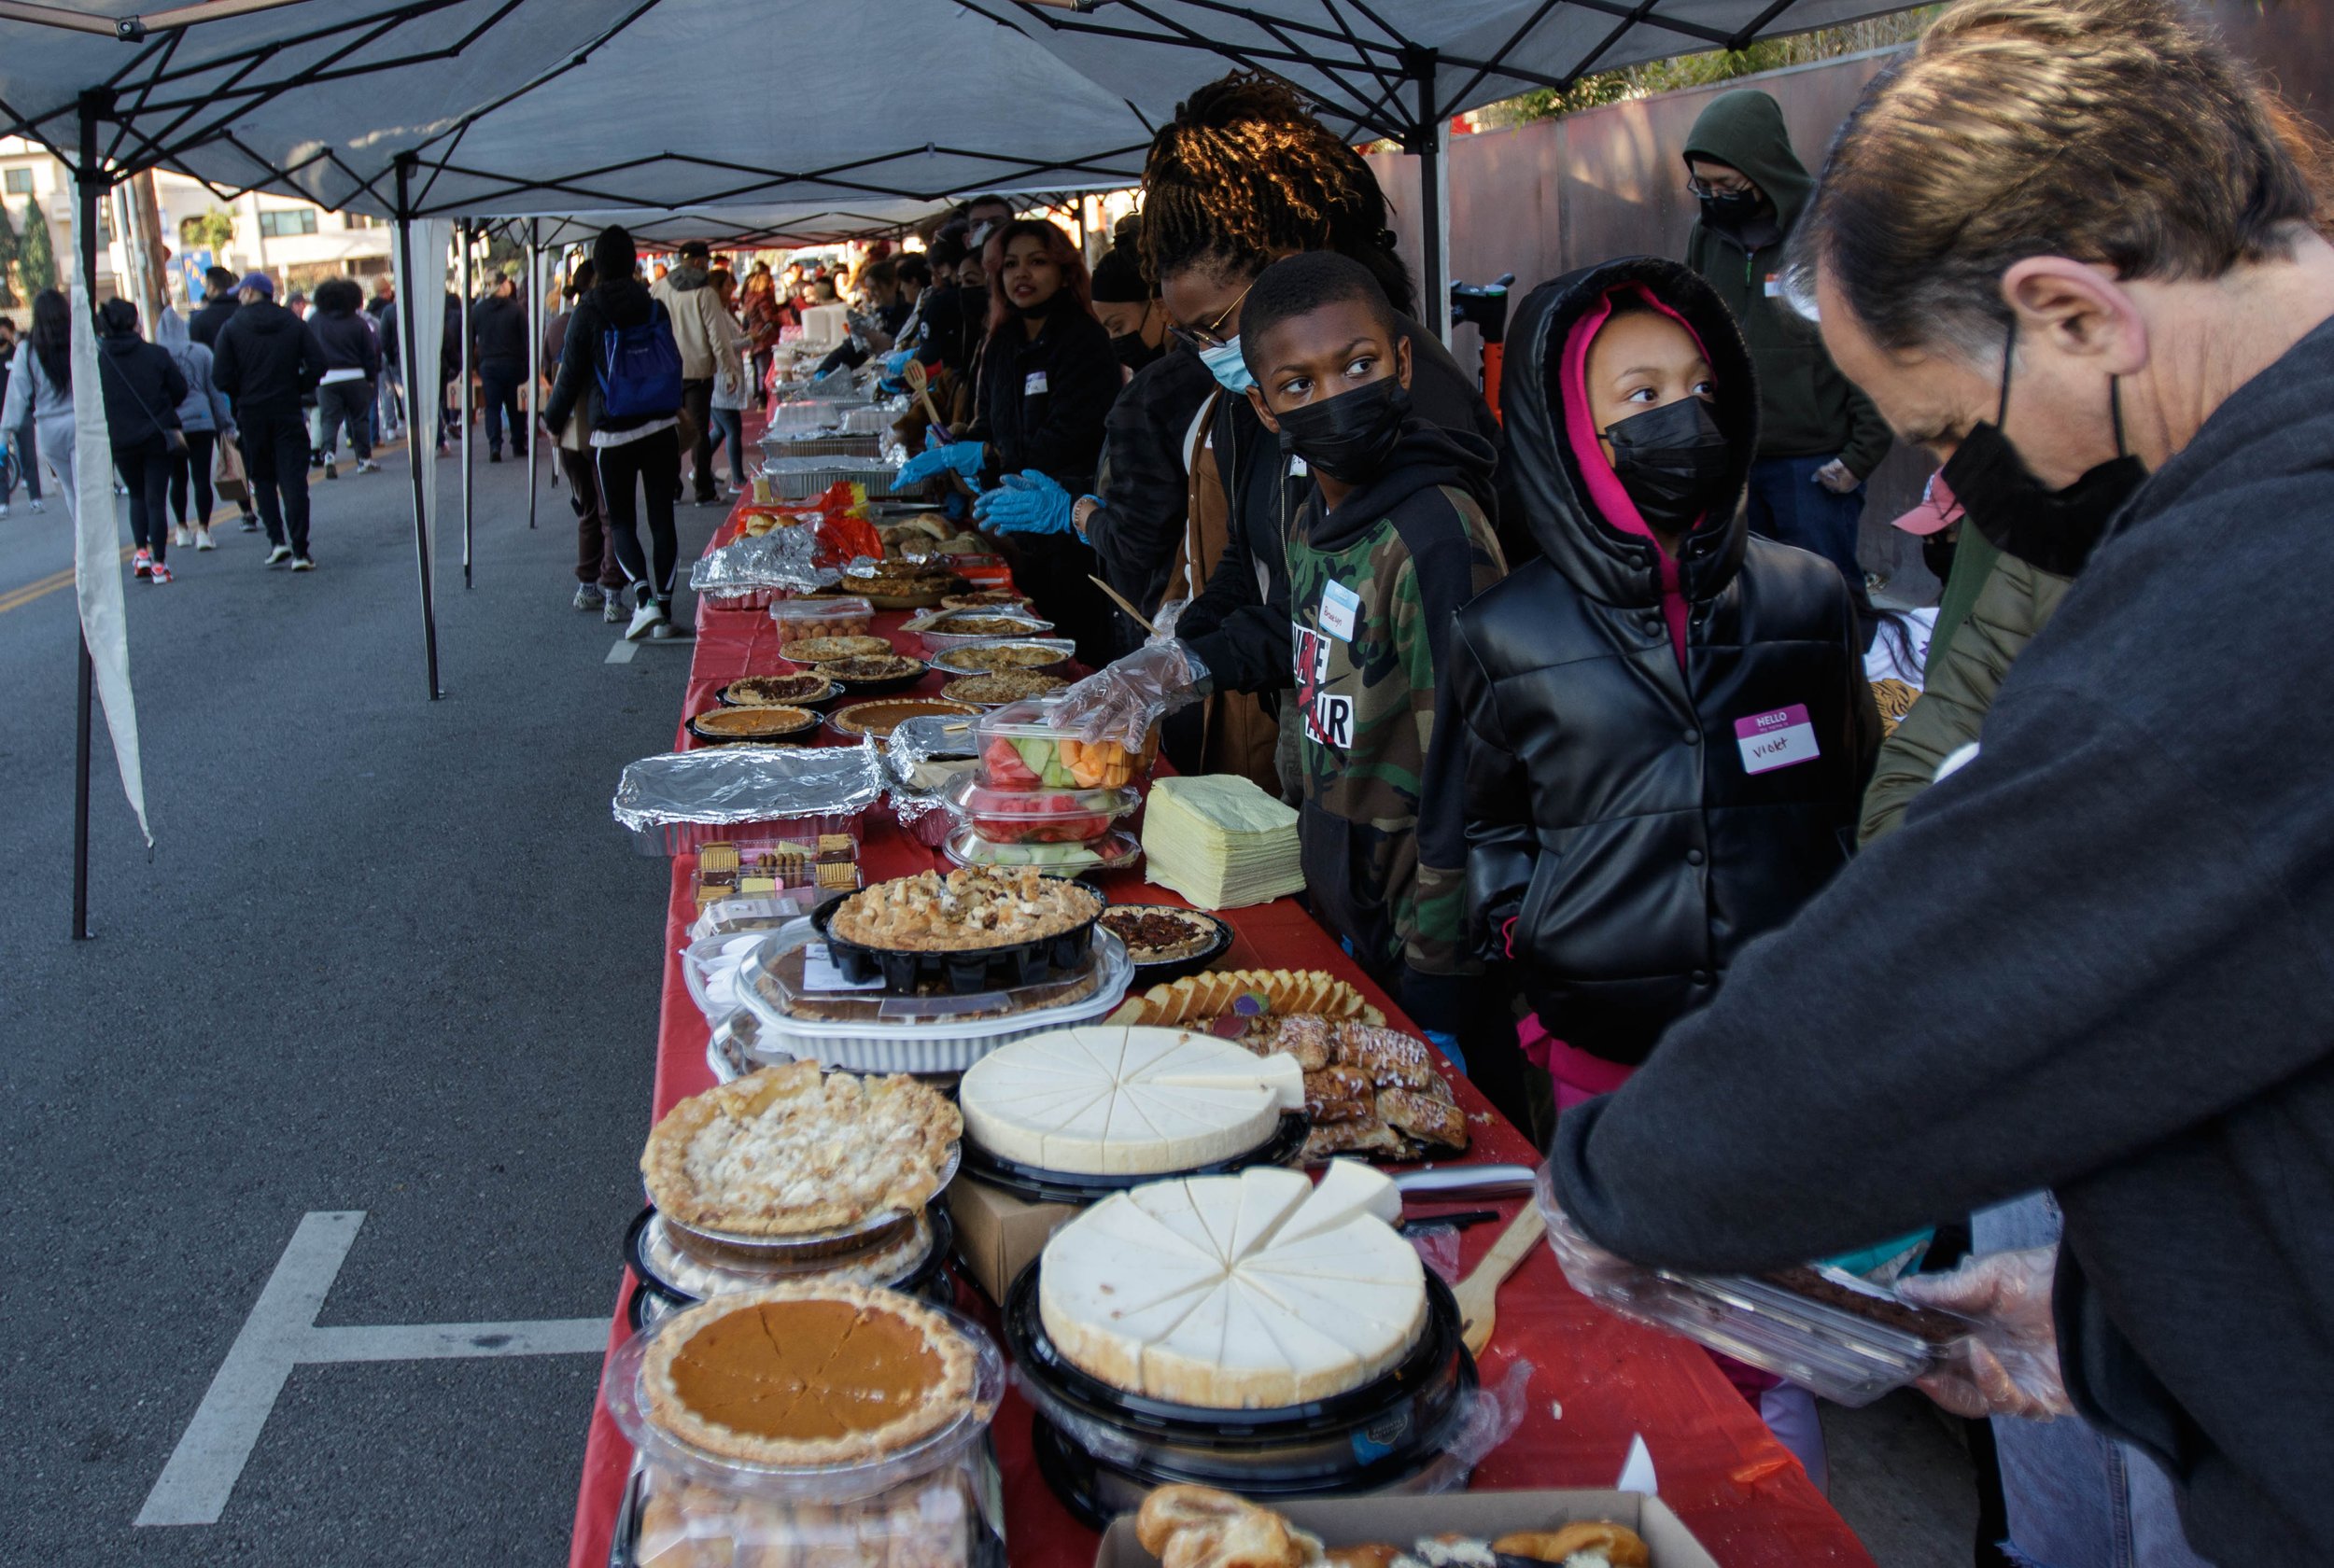  For the past 10 years, Lost Angels Org a non profit based in Los Angeles has been been giving out food and utilities to the homeless in Venice on Thanksgiving Day. Nov. 24, 2022. Venice, Calif. (Ee Lin Tsen | The Corsair) 